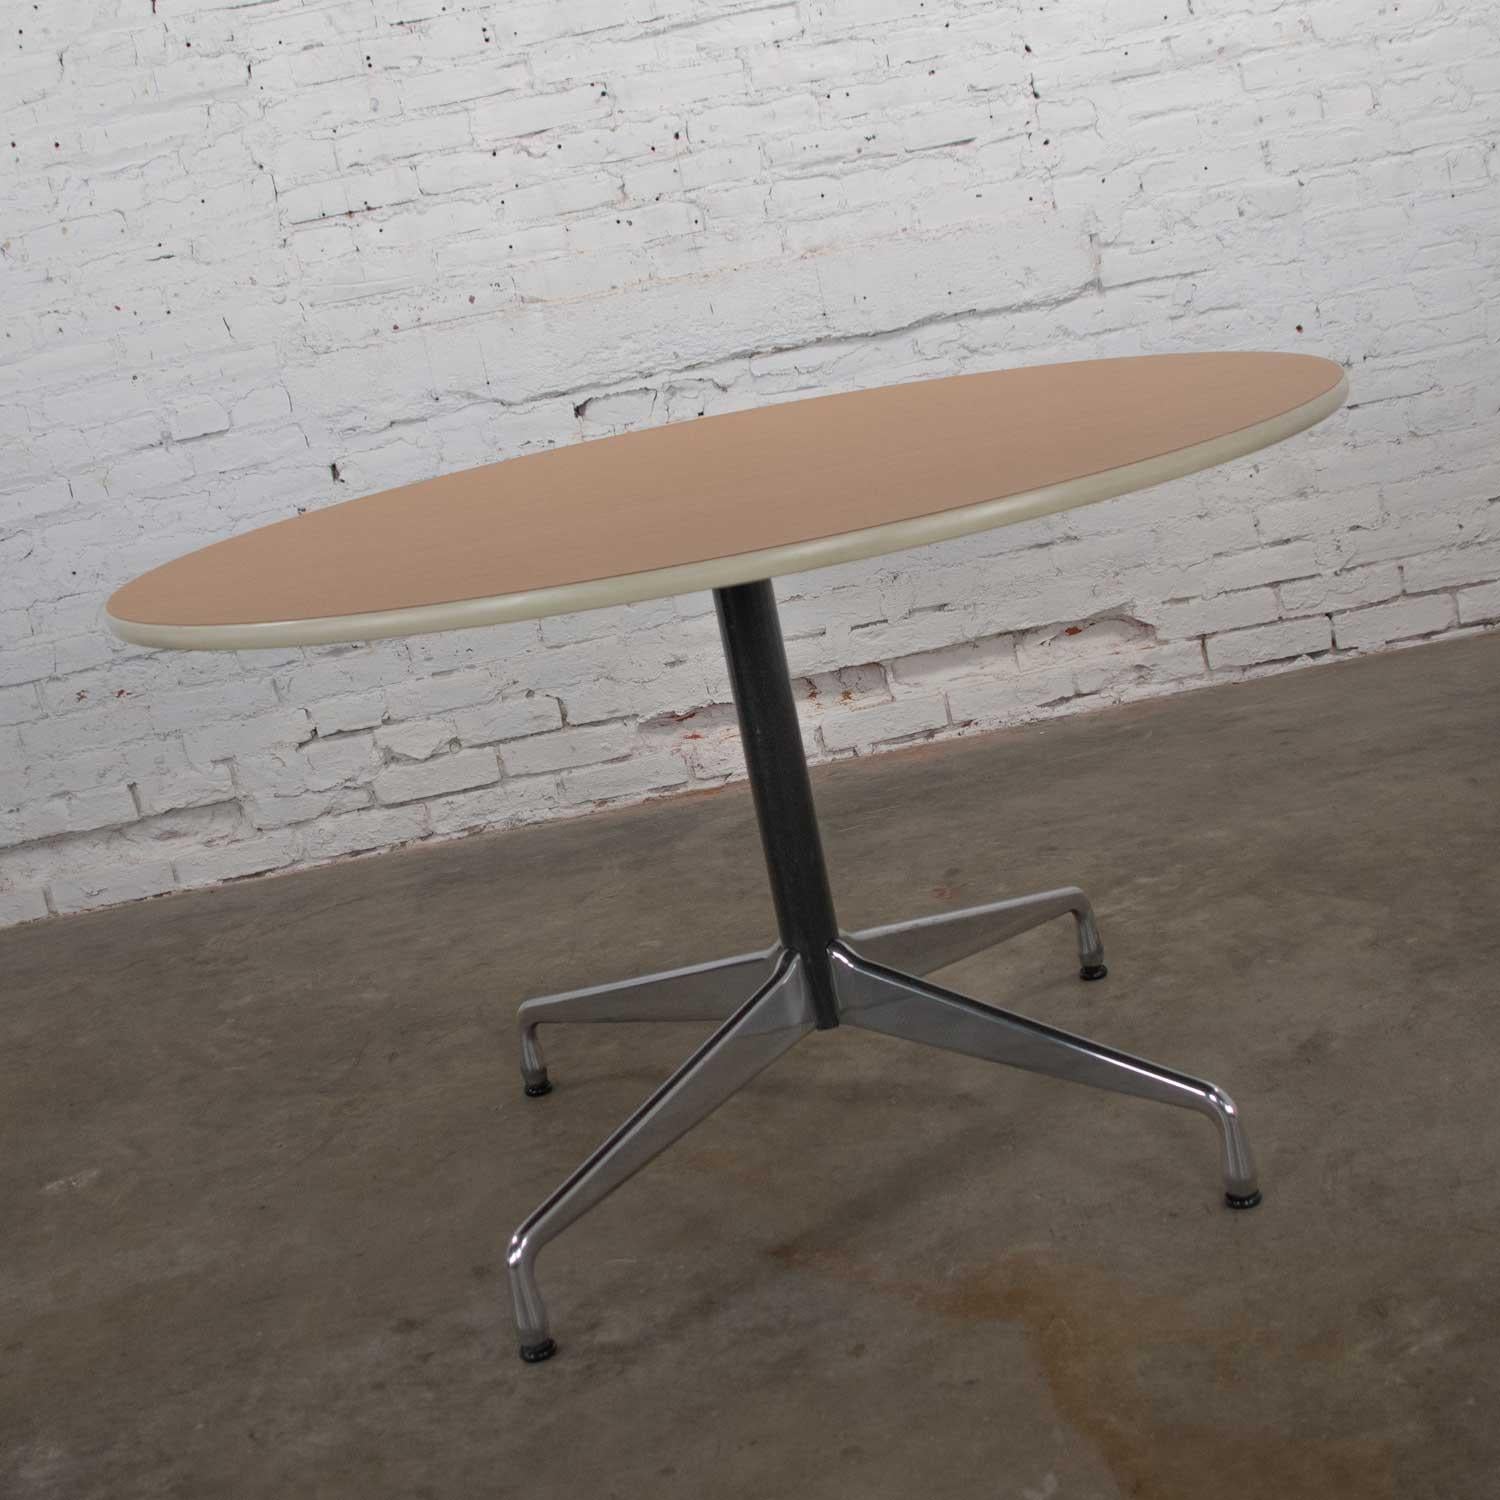 Eames Herman Miller Round Table Universal Base Wood Grain Laminate Top In Good Condition For Sale In Topeka, KS